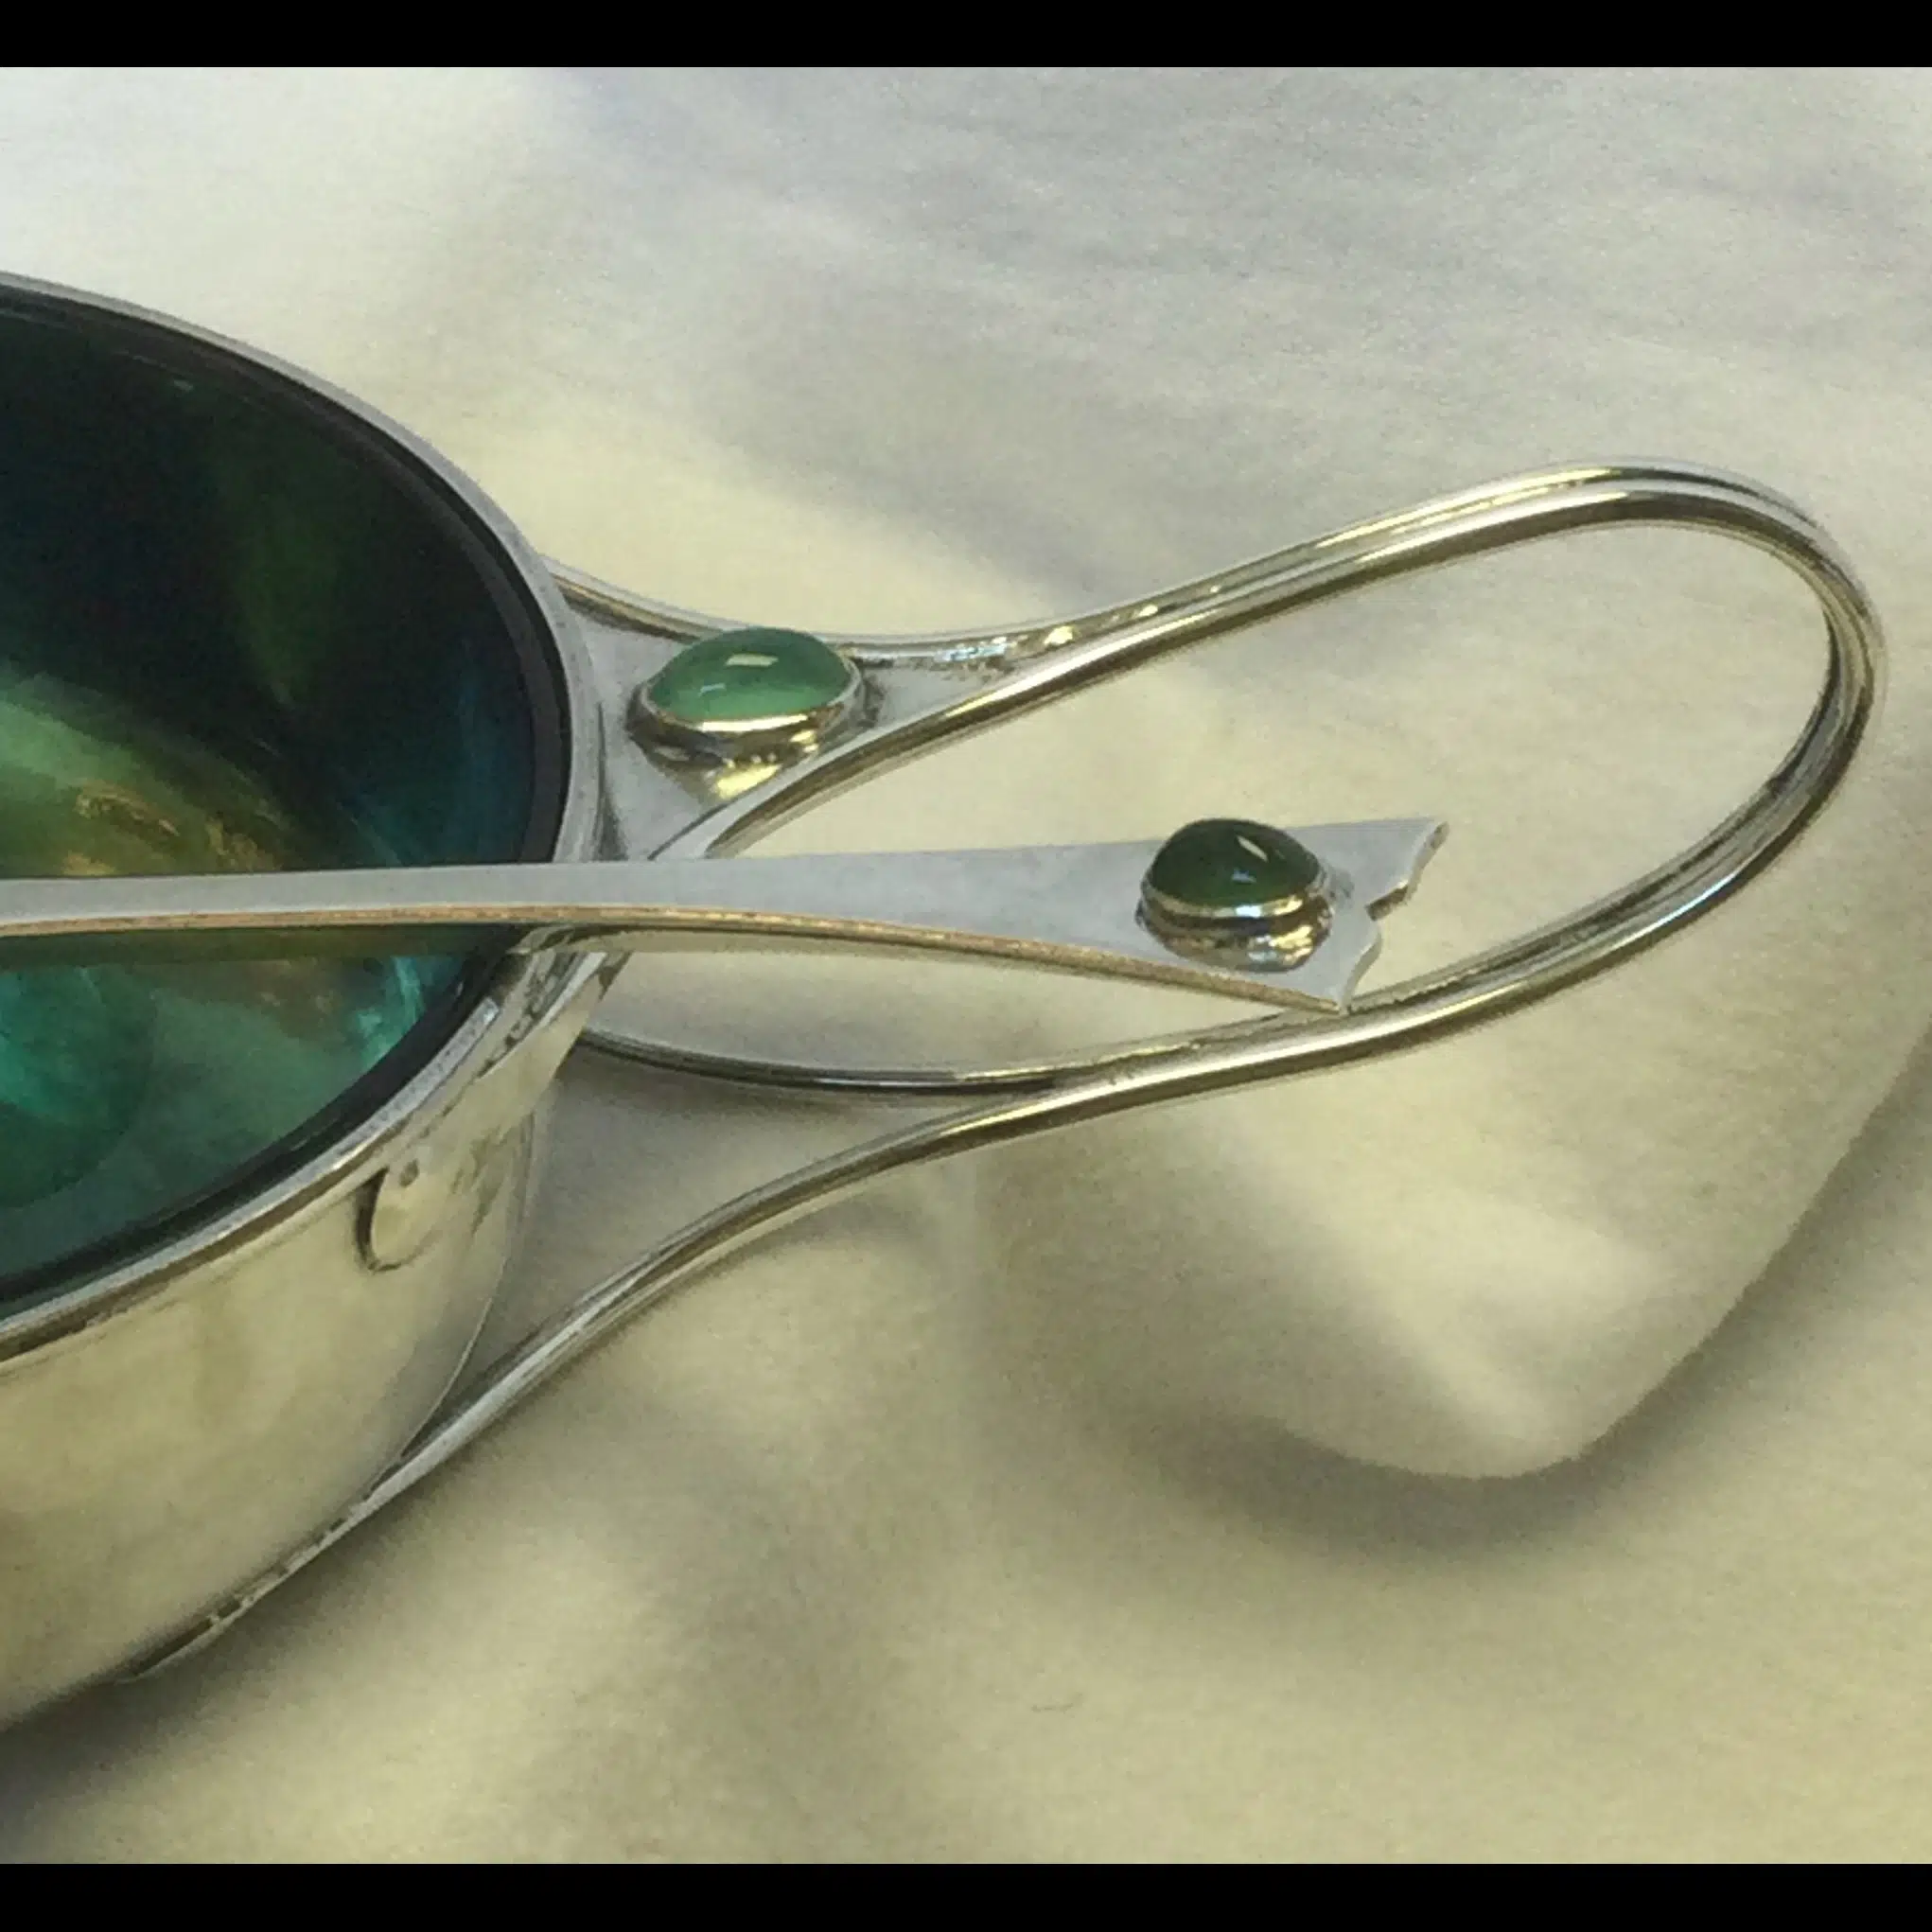 c.r.ashbee guild of handicrafts gofh silver porringer spoon and liner with cabochons 1908